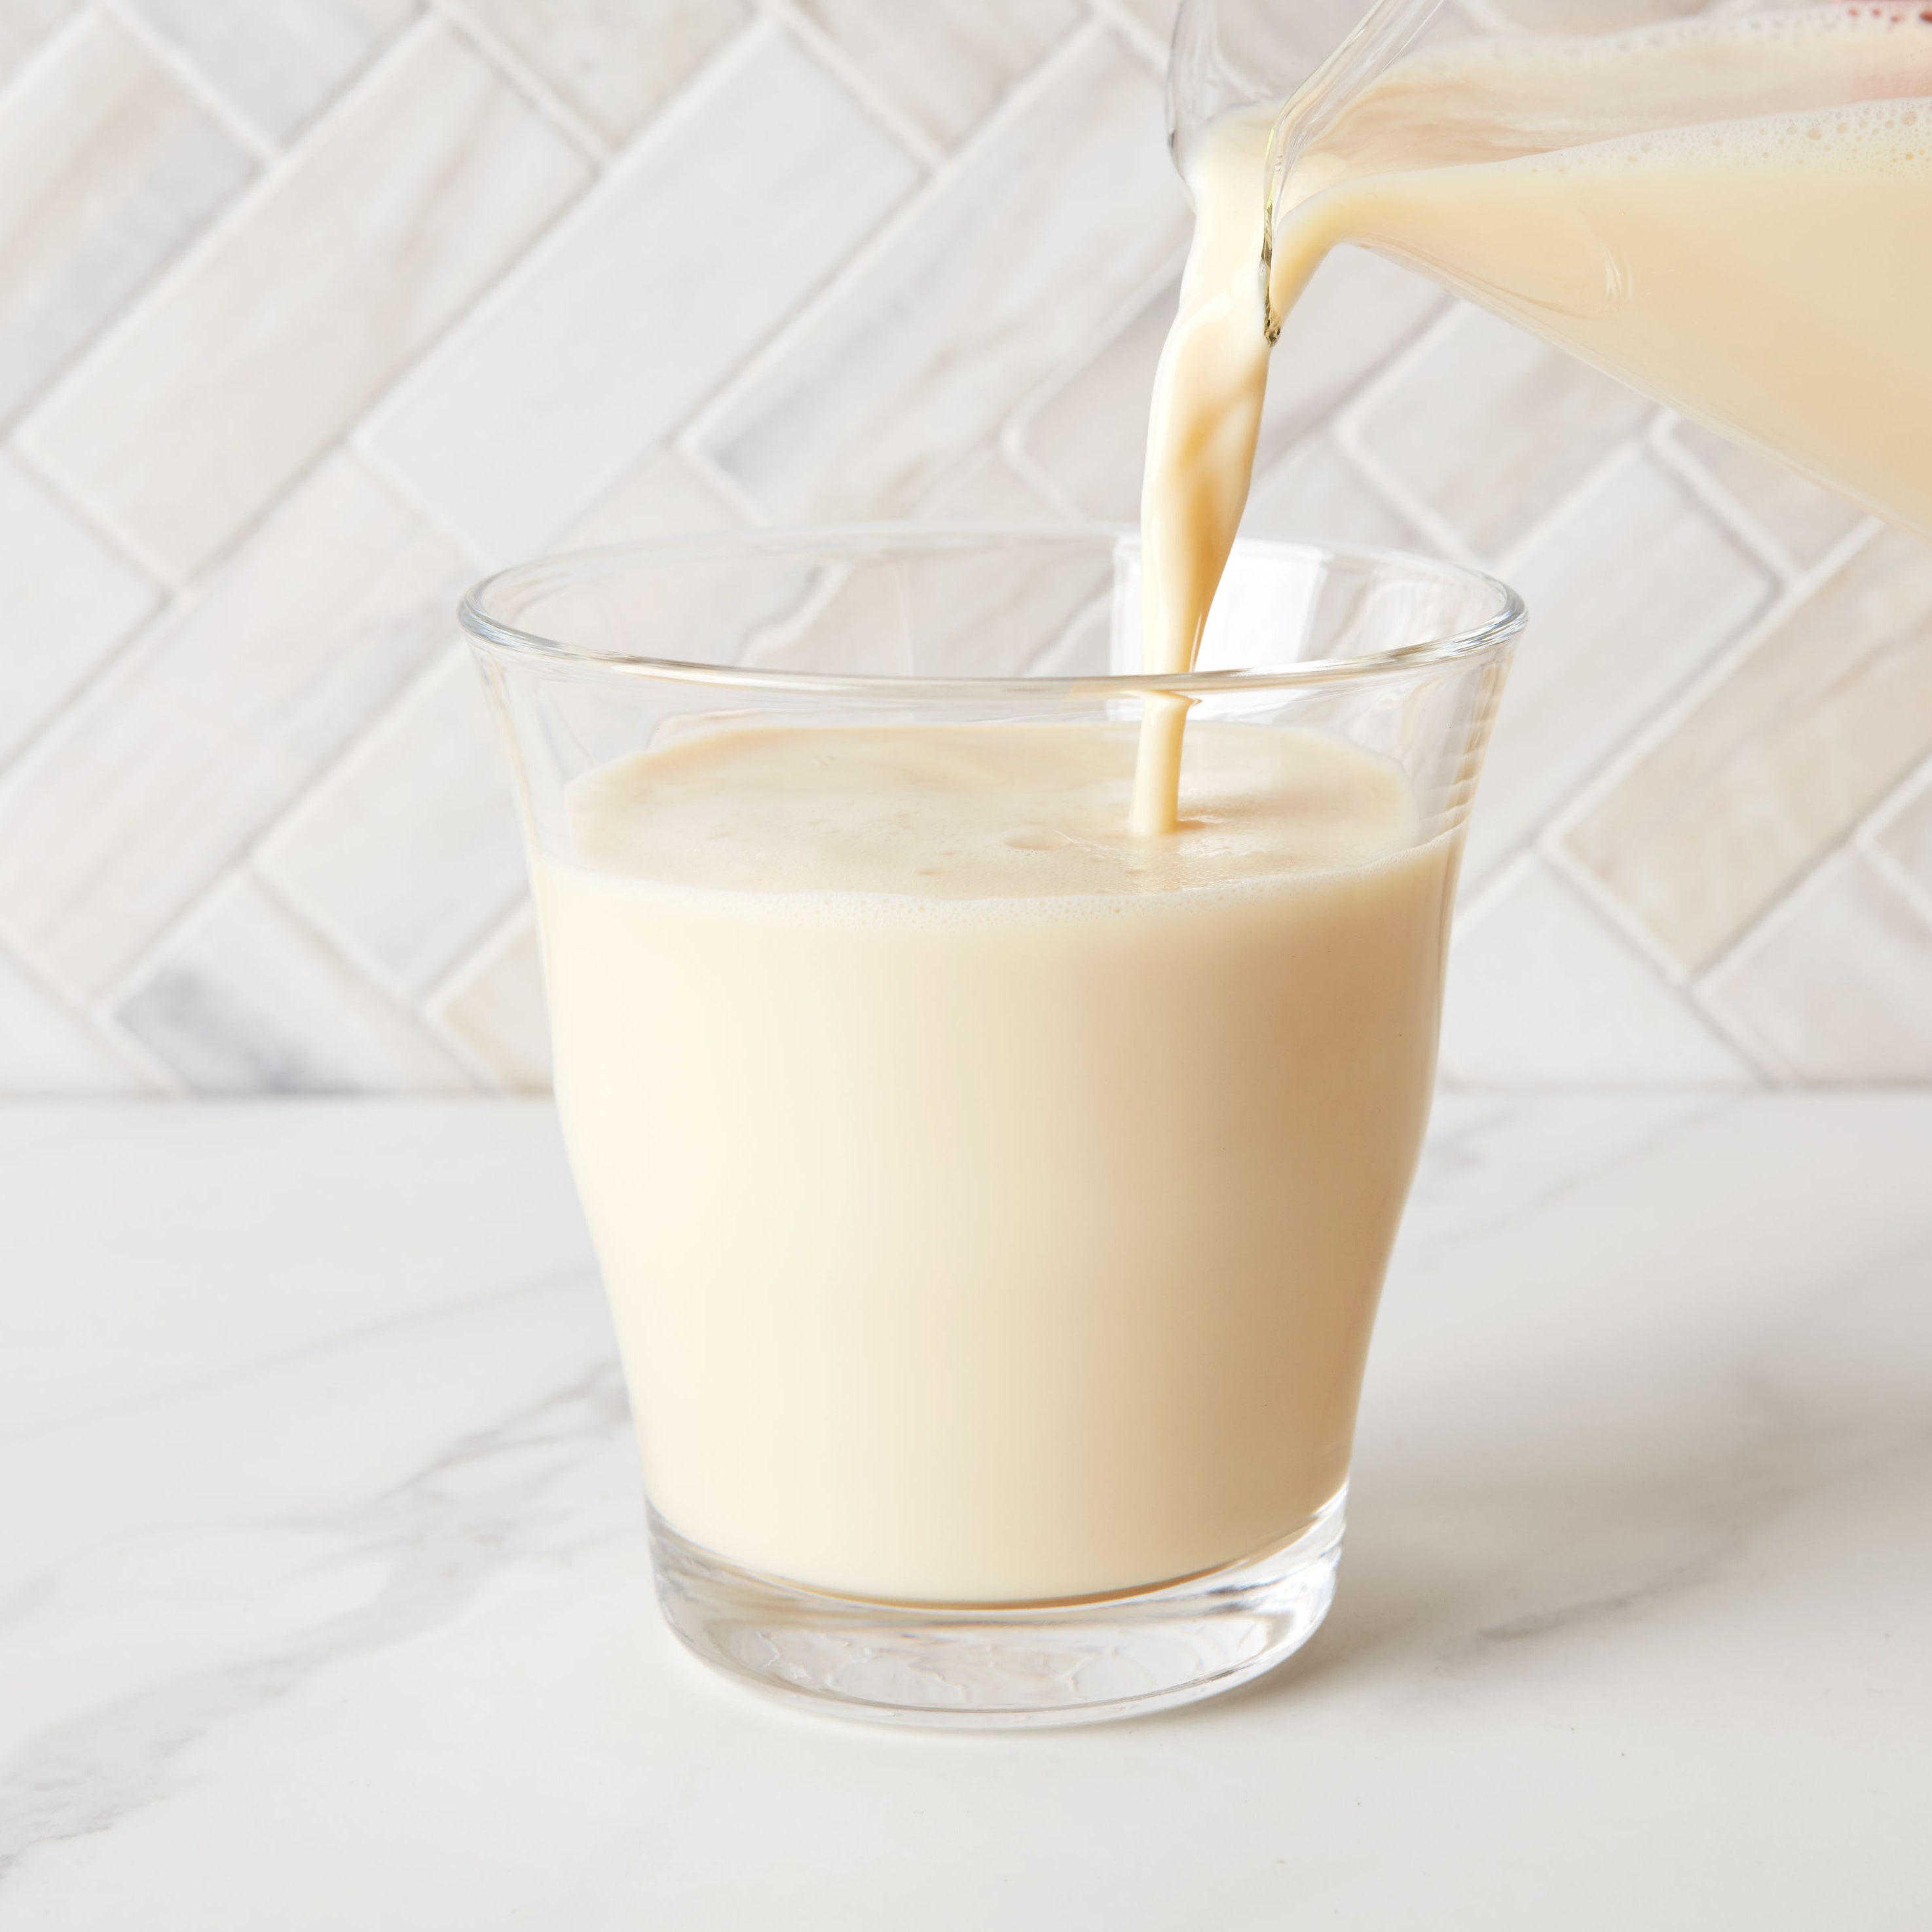 What’s in Soy Milk? A Closer Look at Ingredients and More